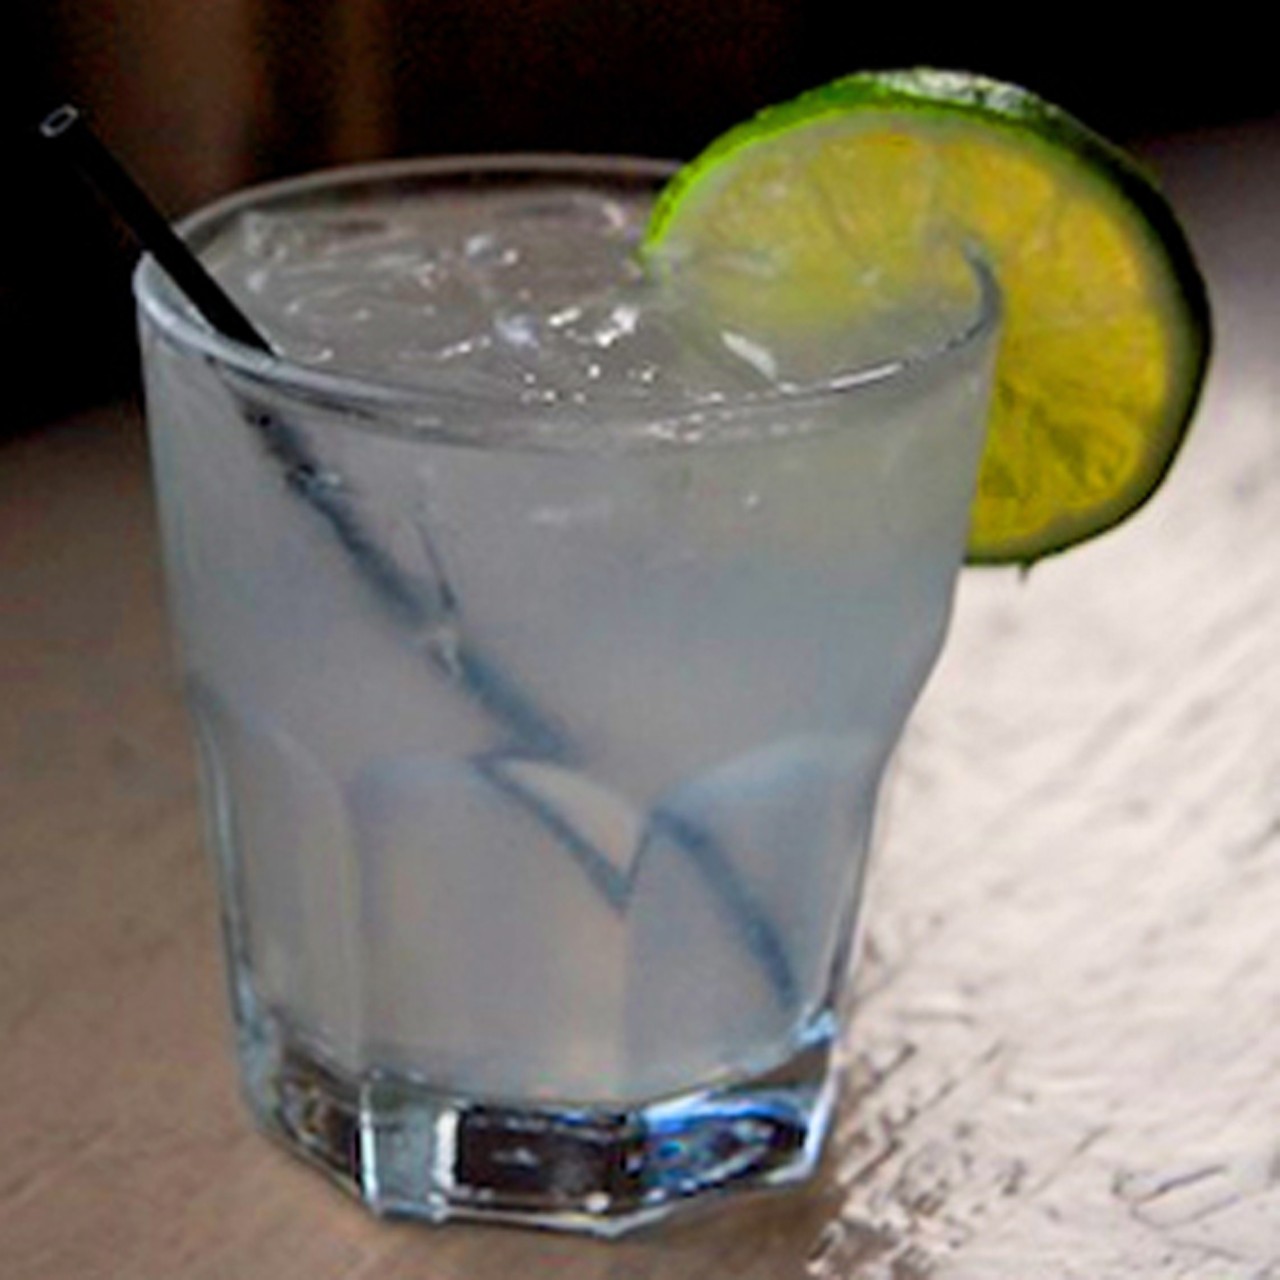 Maryland House's Gin Rickey: Two ounces of gin, the juice of half a lime and sparkling water. It's less harsh than a gin and tonic, and you also sound cooler ordering it.